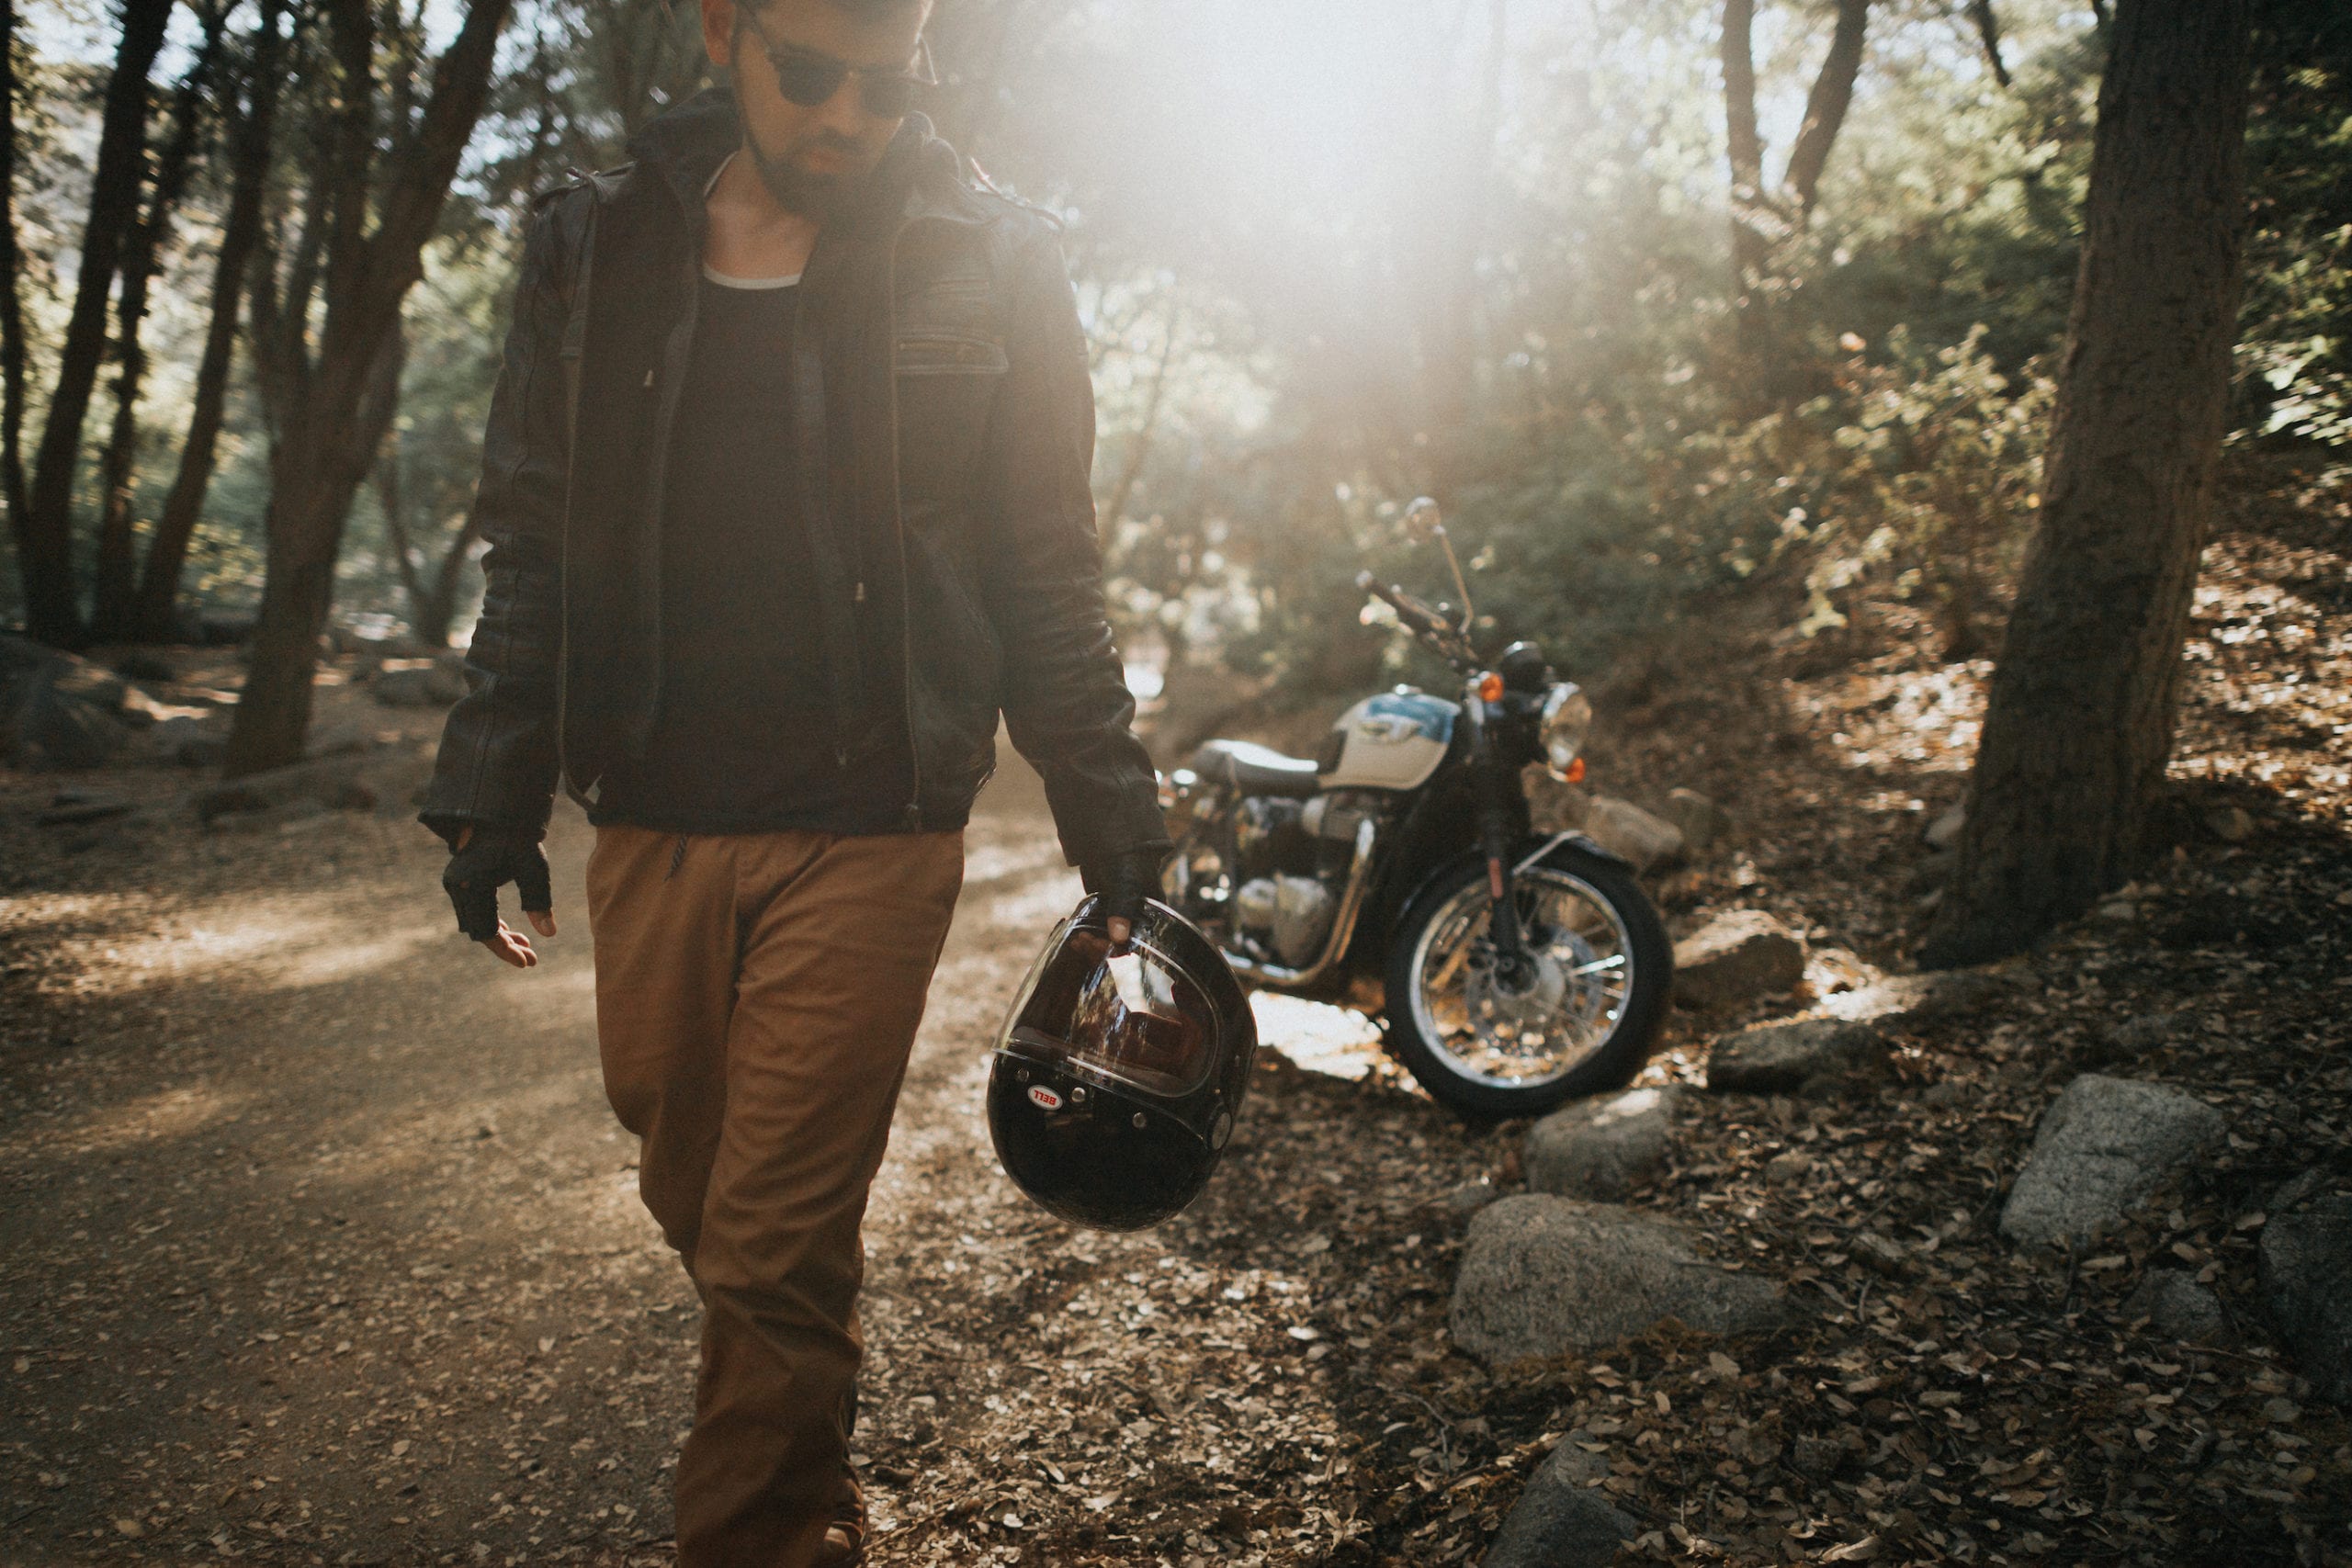 Motorcycle rider wearing shades and leather gear poses for the camera in the middle of the forest holding his Bell helmet